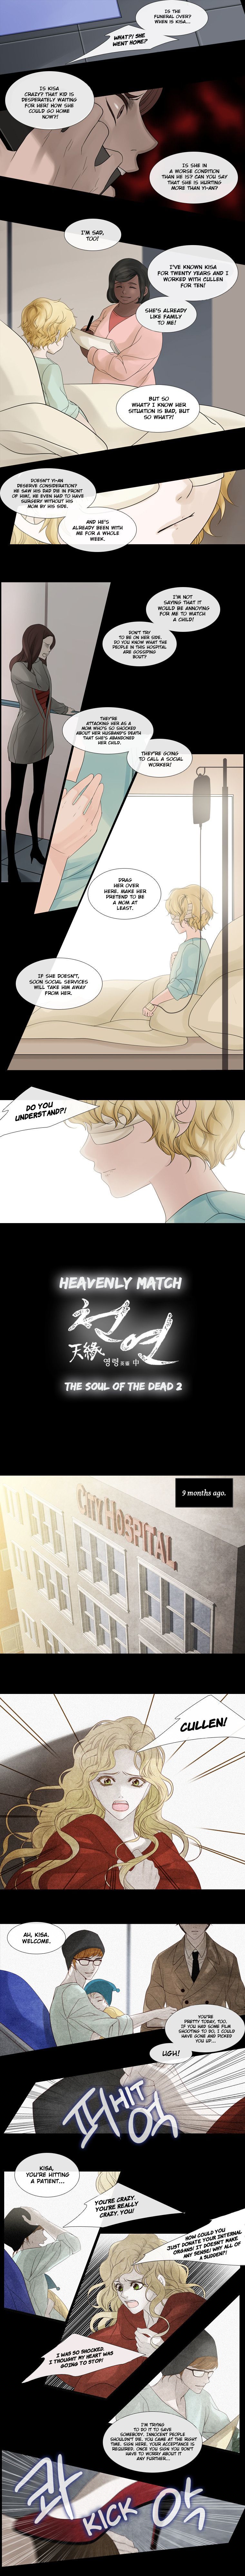 Heavenly Match - Page 2